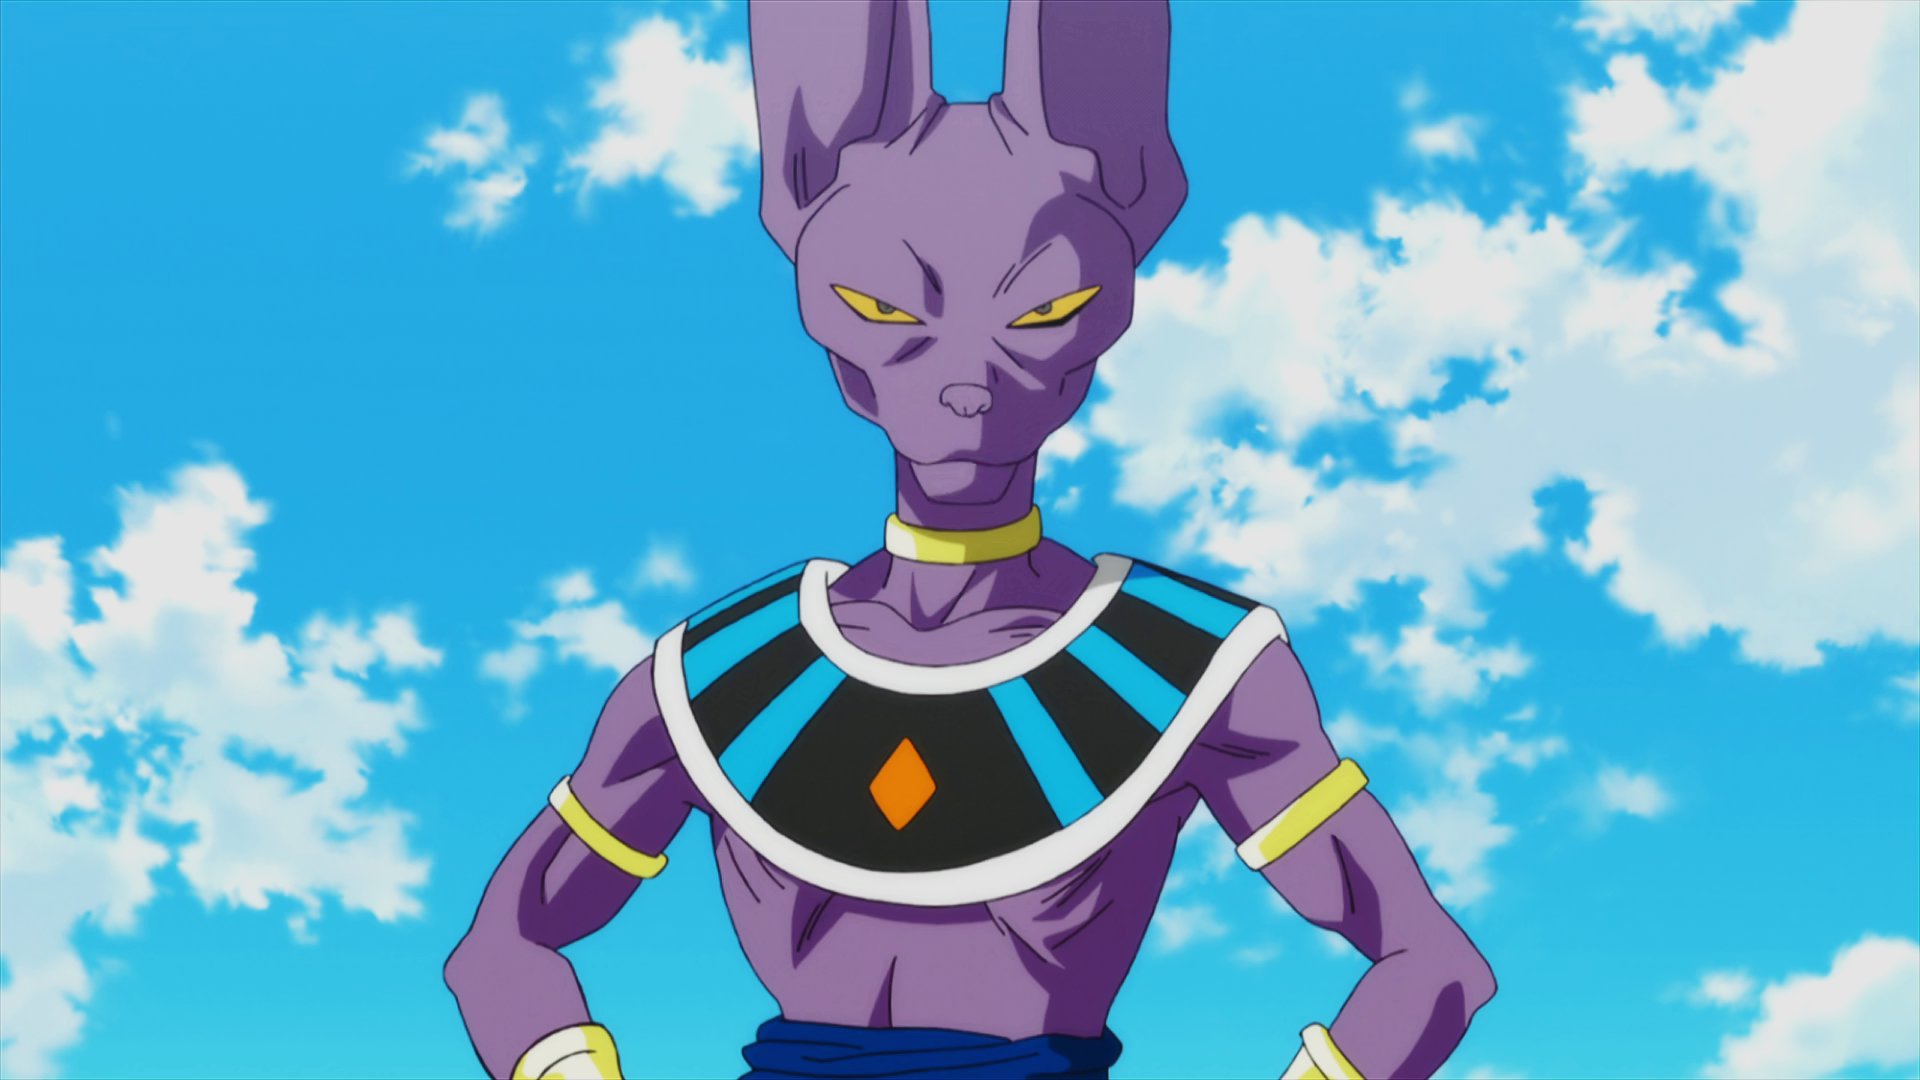 Please make Beerus your delicious sandwich before he destroys the world! 